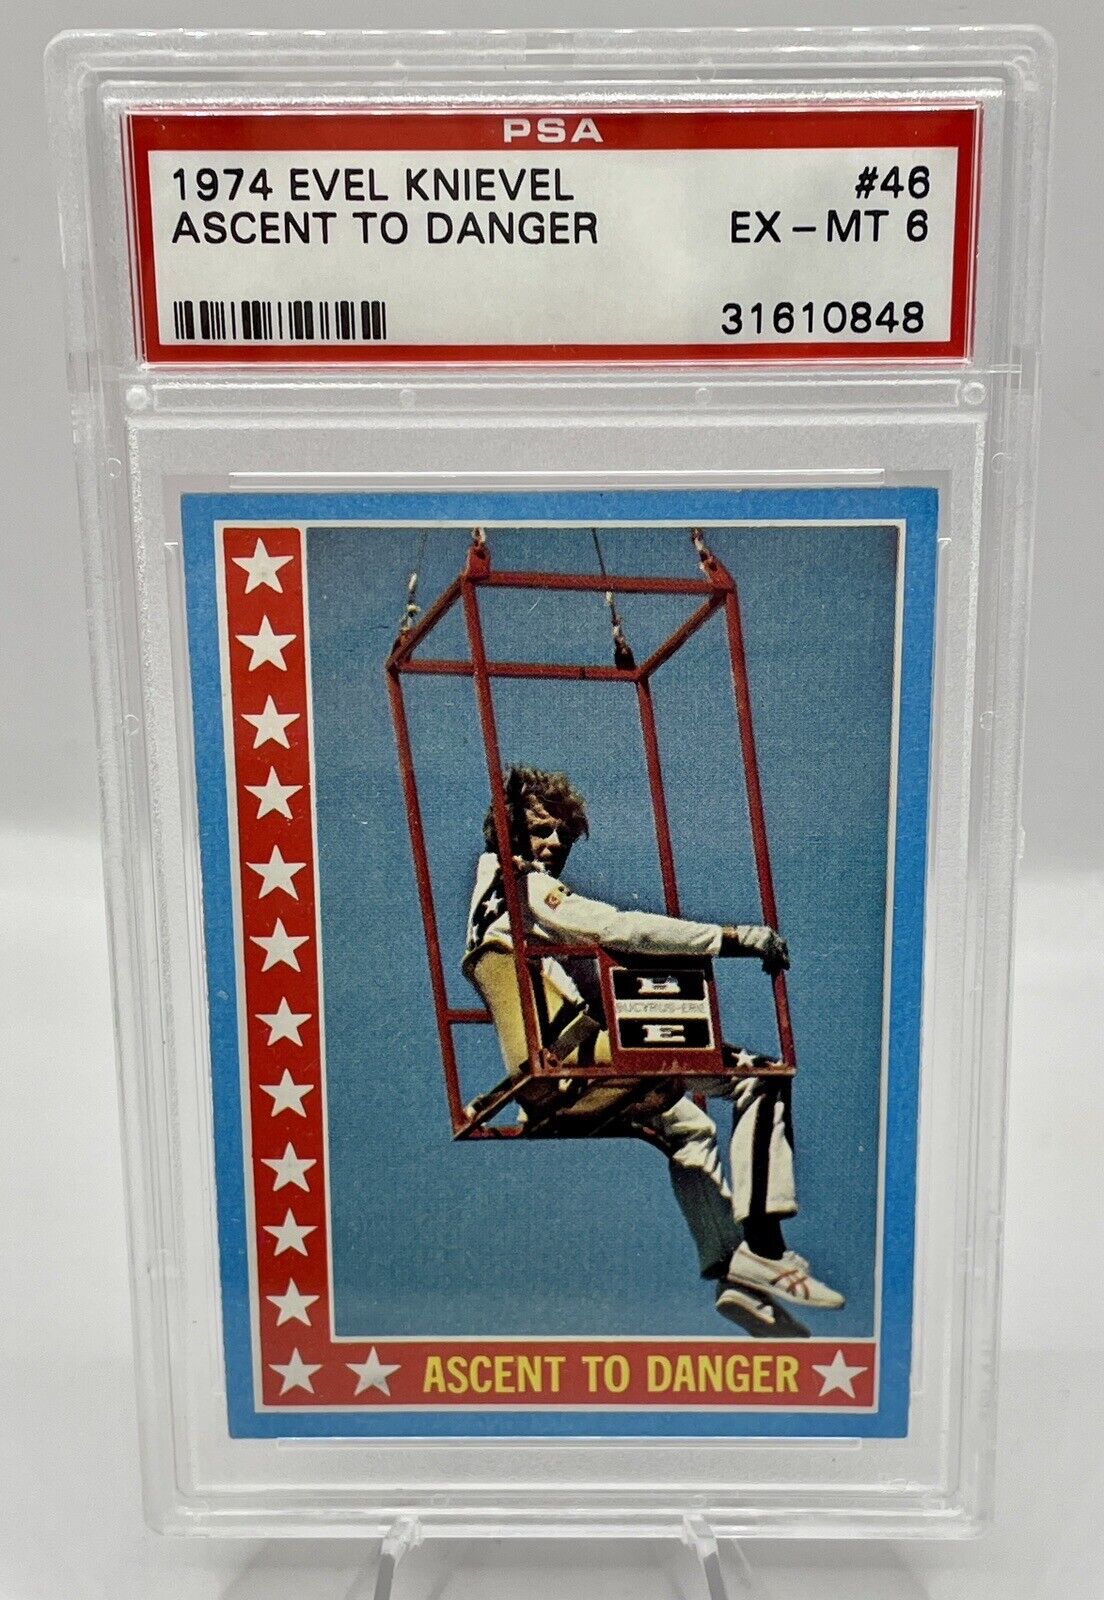 PSA EX-MT 6 1974 Evel Knievel Card #46 Ascent To Danger